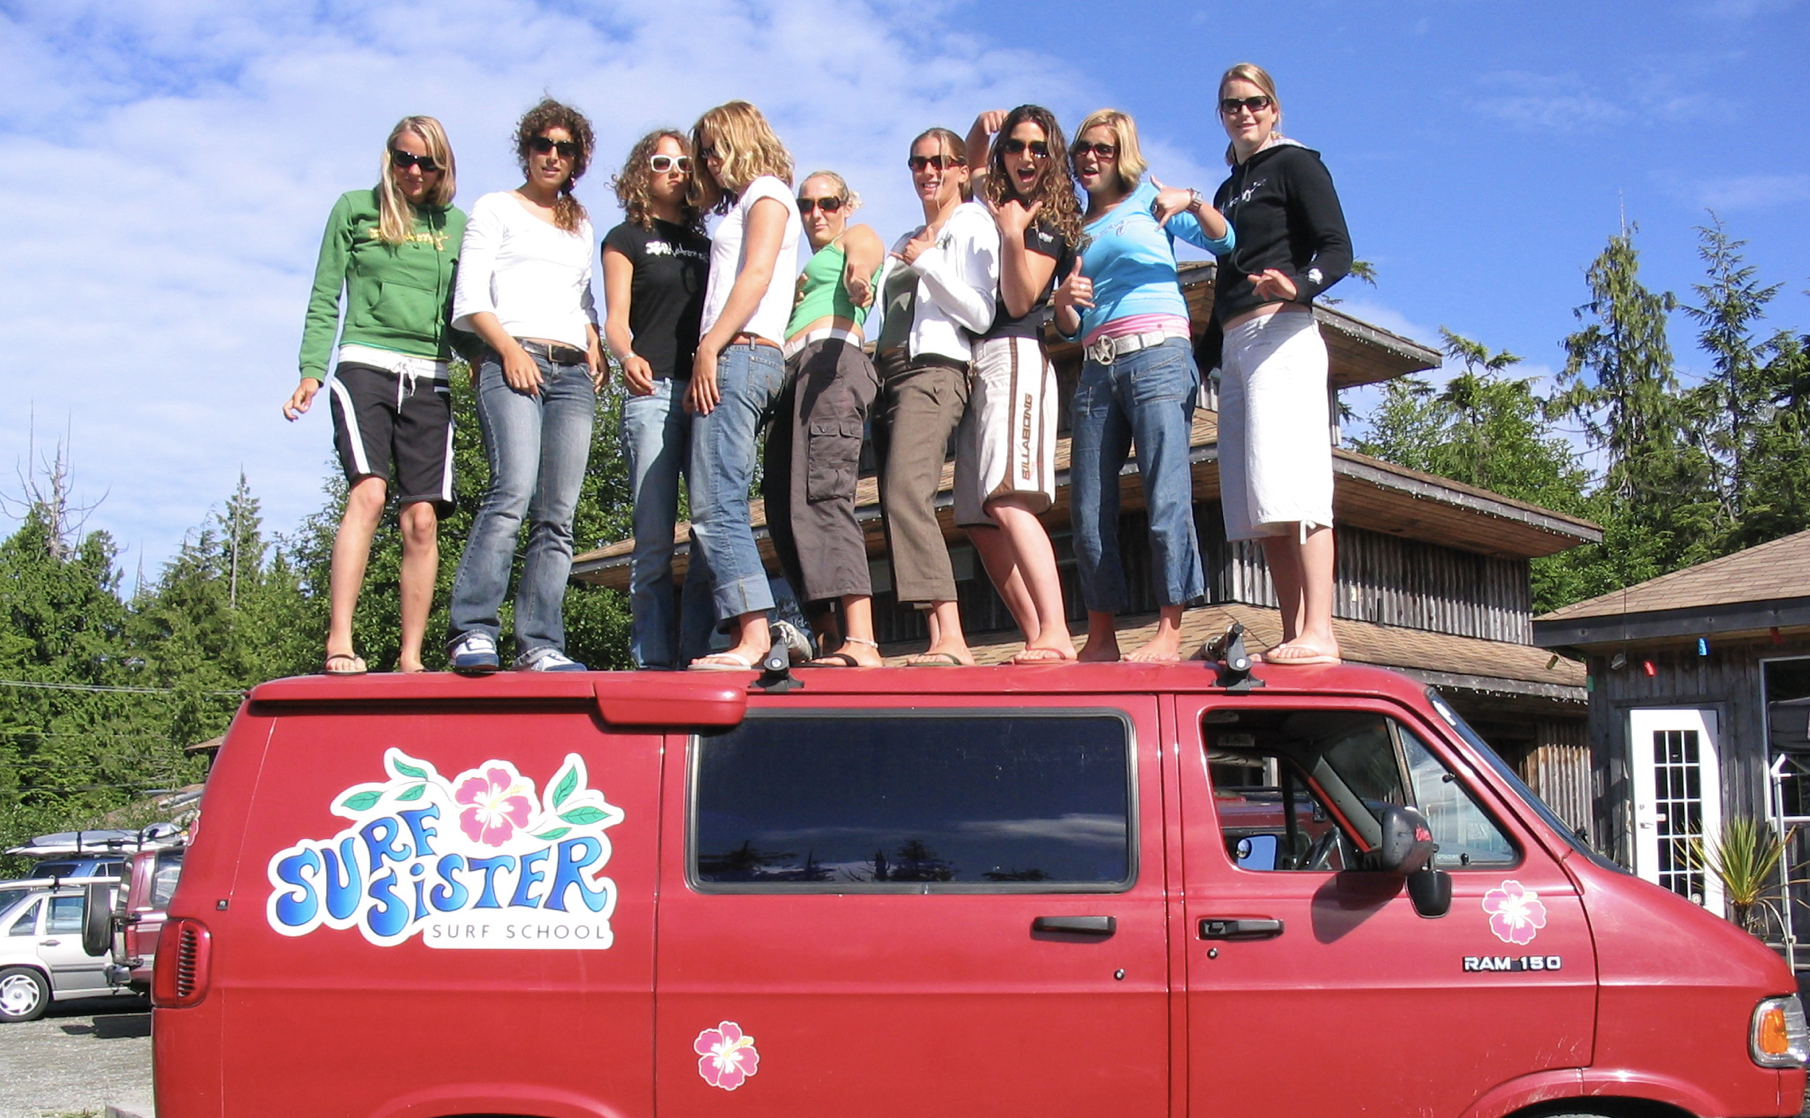 A group of nine women waving shakas around in the early 2000's while standing on top of a red van with the Surf Sister logo.